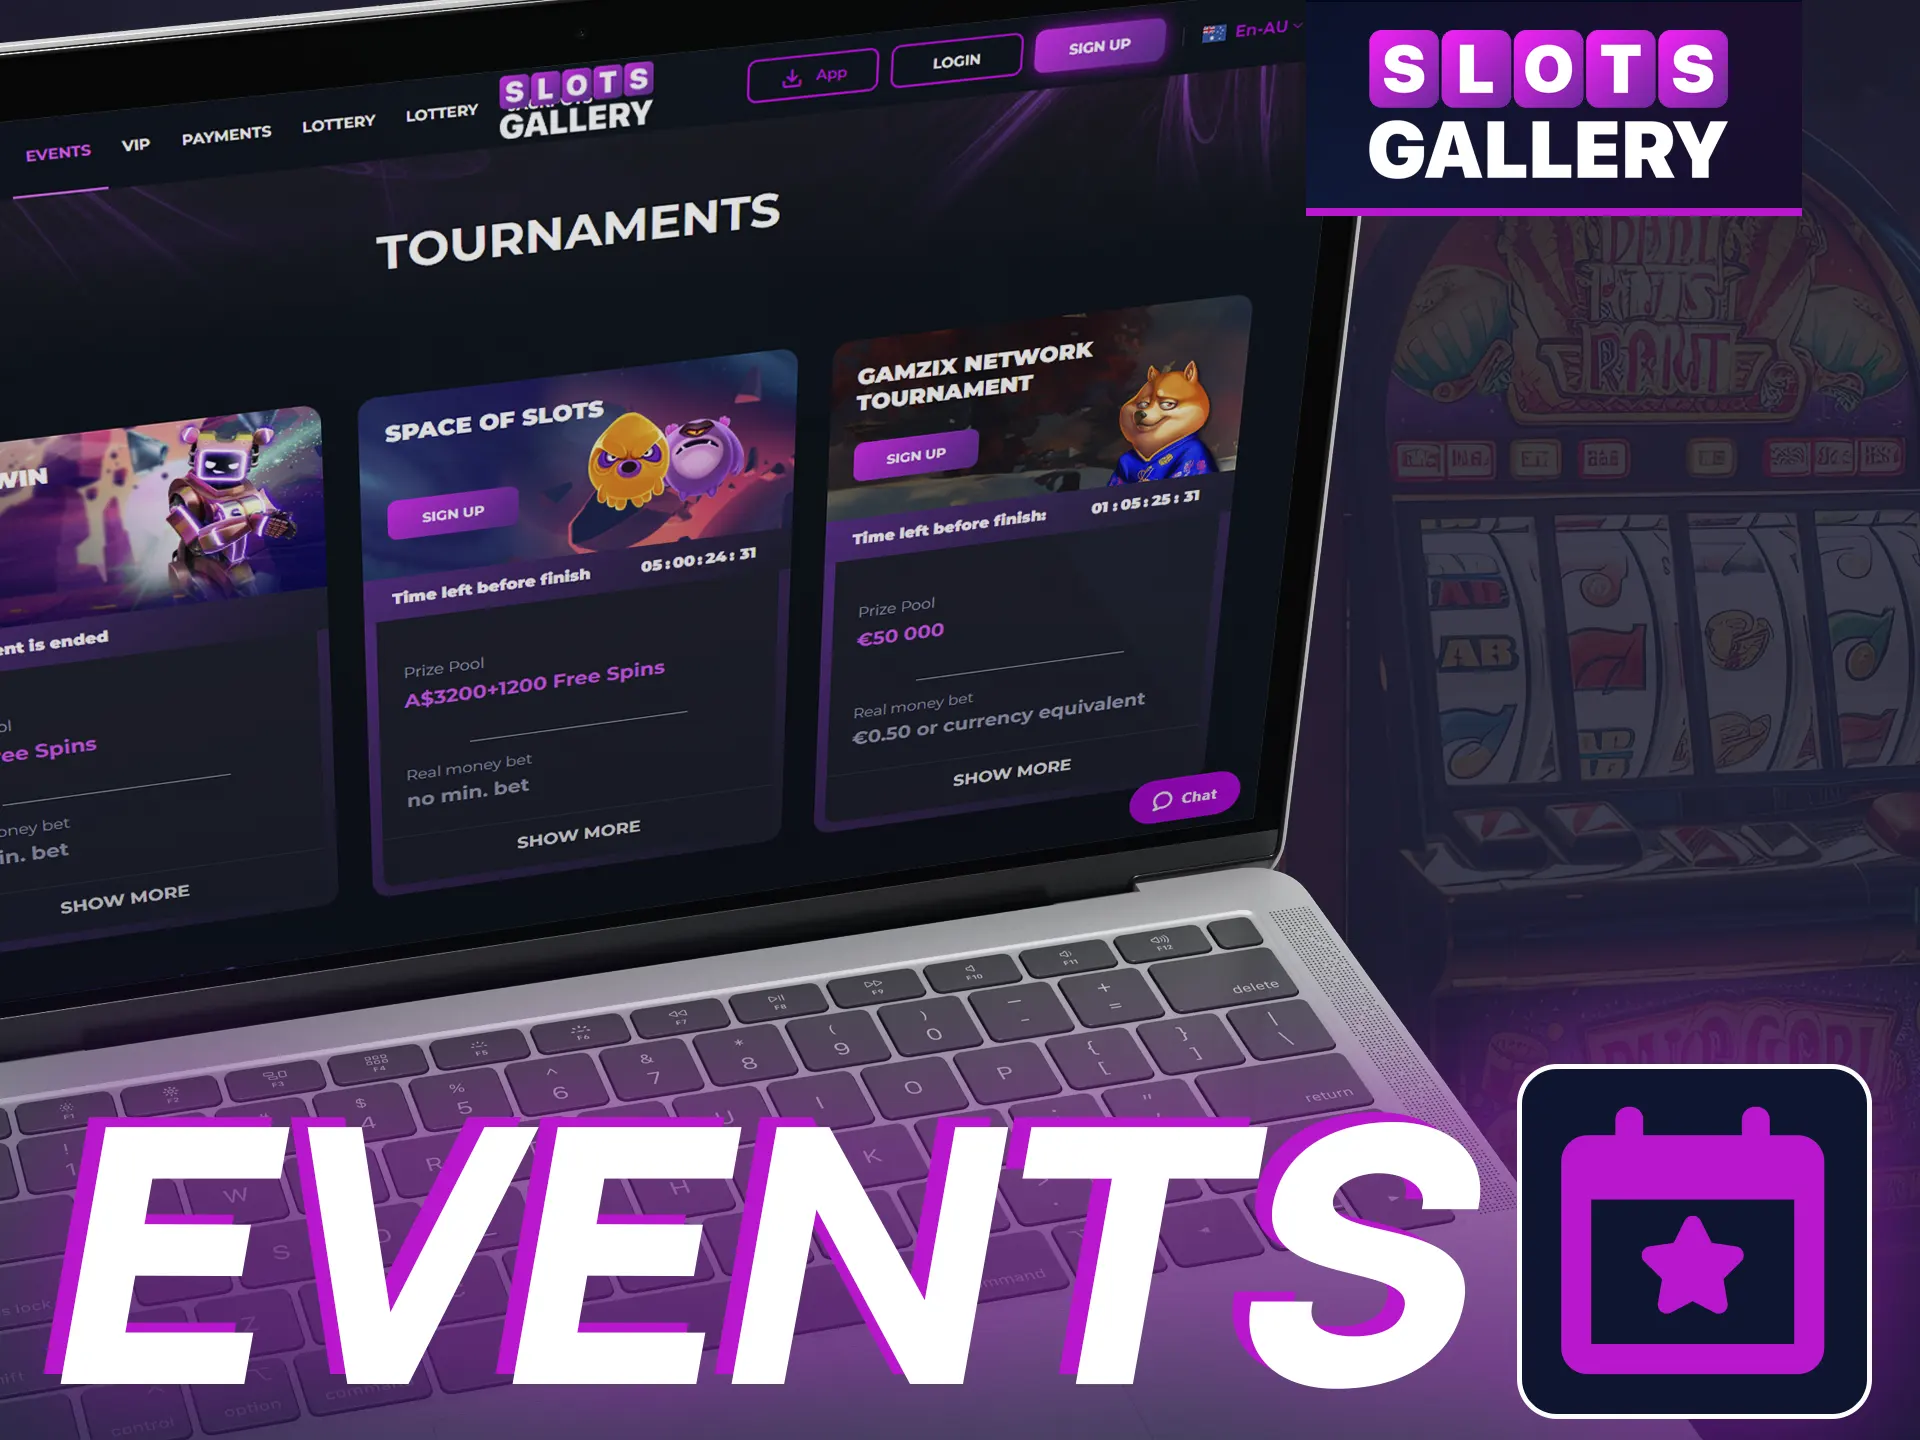 Take a part in Slots Gallery events to win prizes.